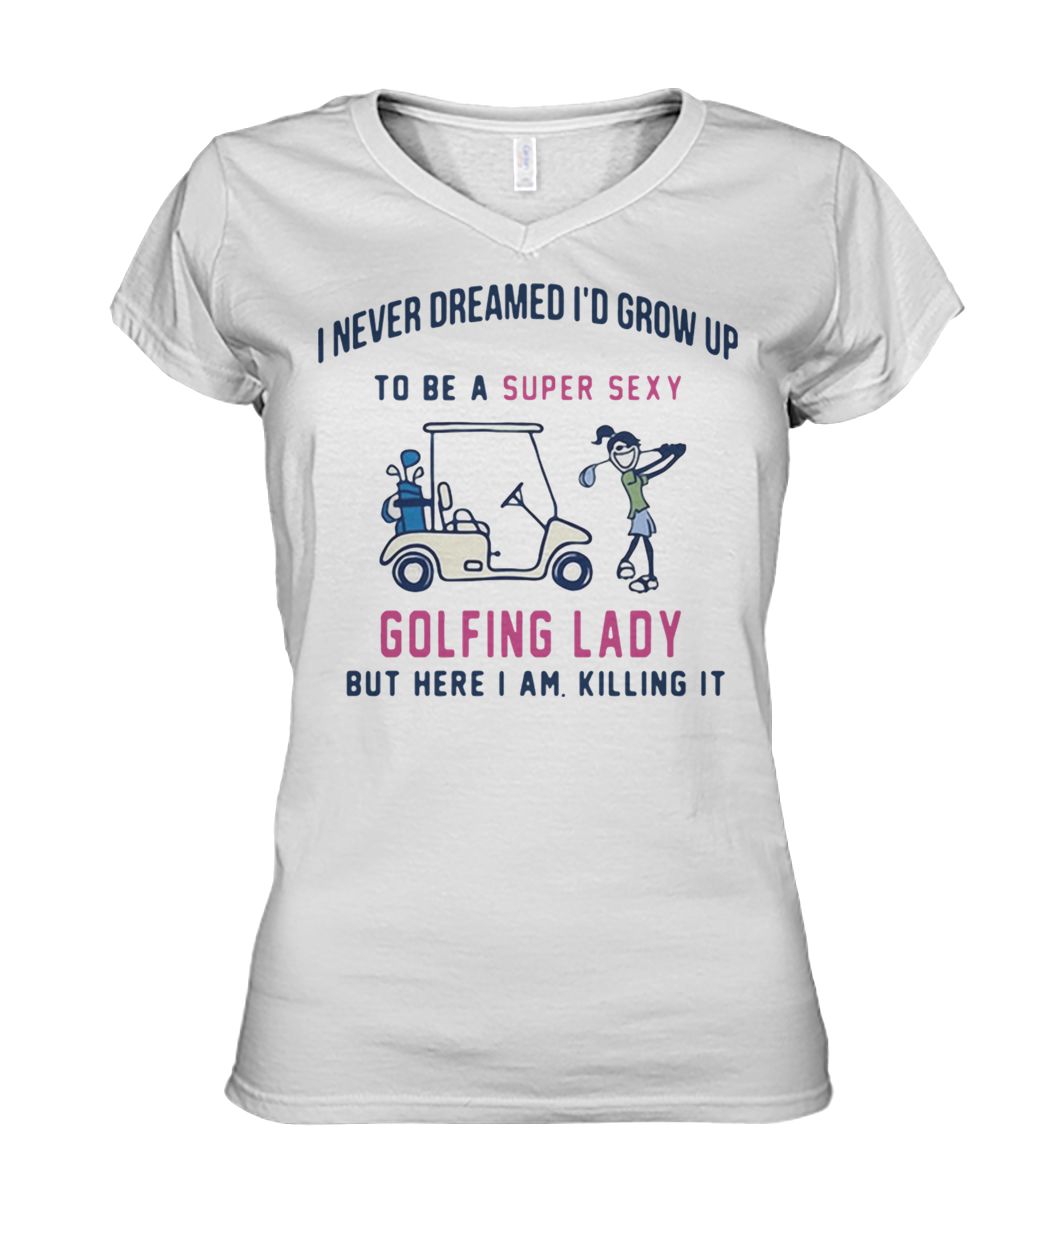 I never dreamed I’d grow up to be a super sexy golfing lady but there I am killing it women's v-neck